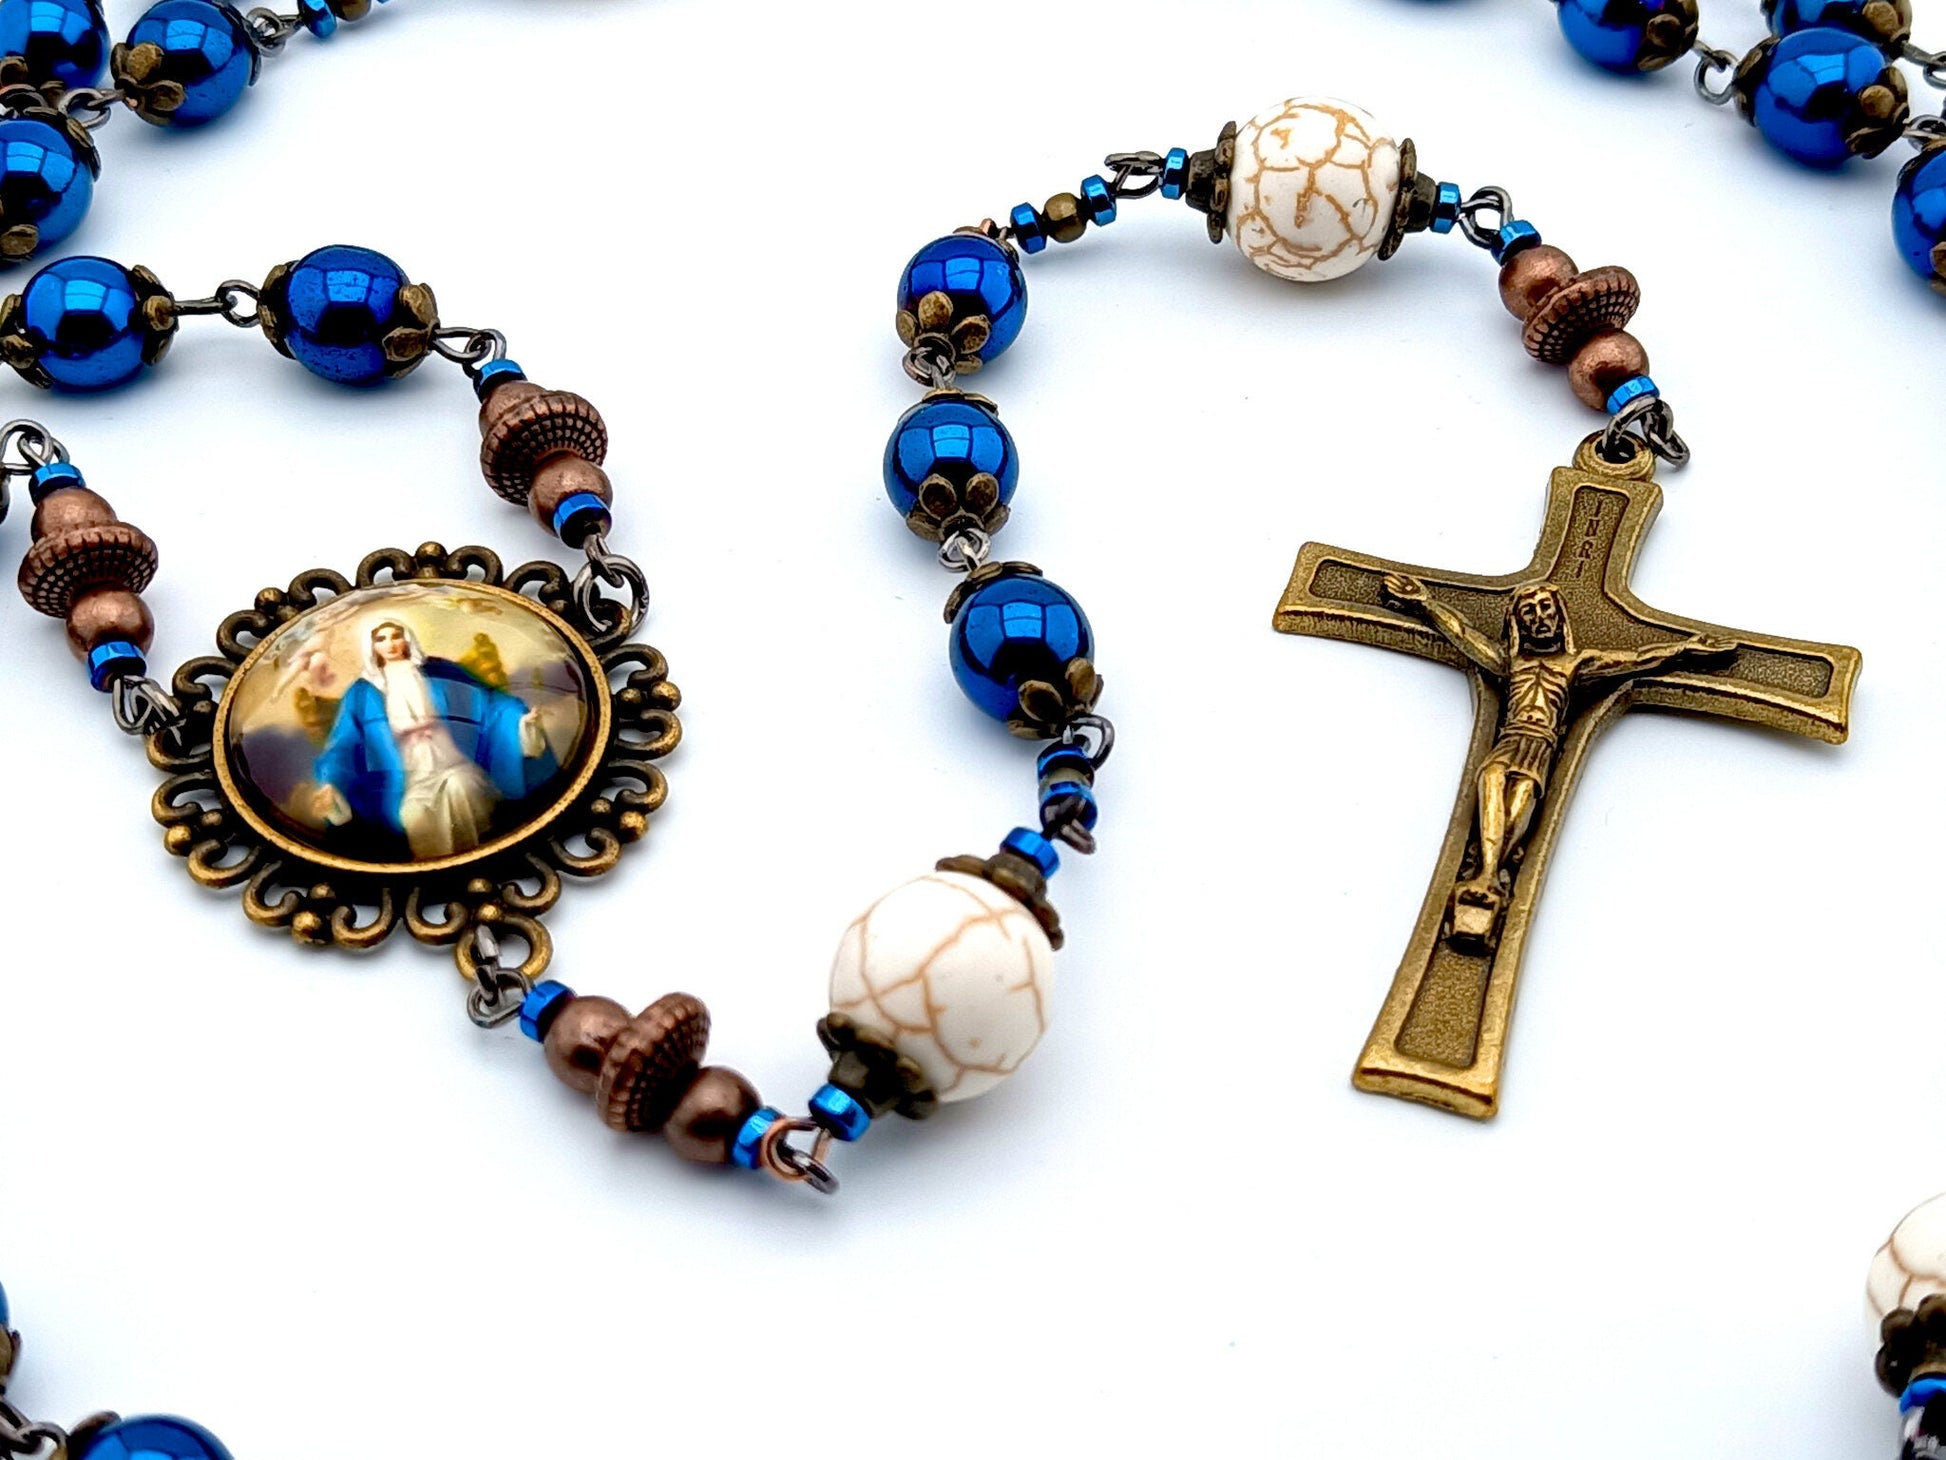 Our Lady Queen of Heaven unique rosary beads with blue hematite beads, bronze crucifix bead caps and picture centre medal.